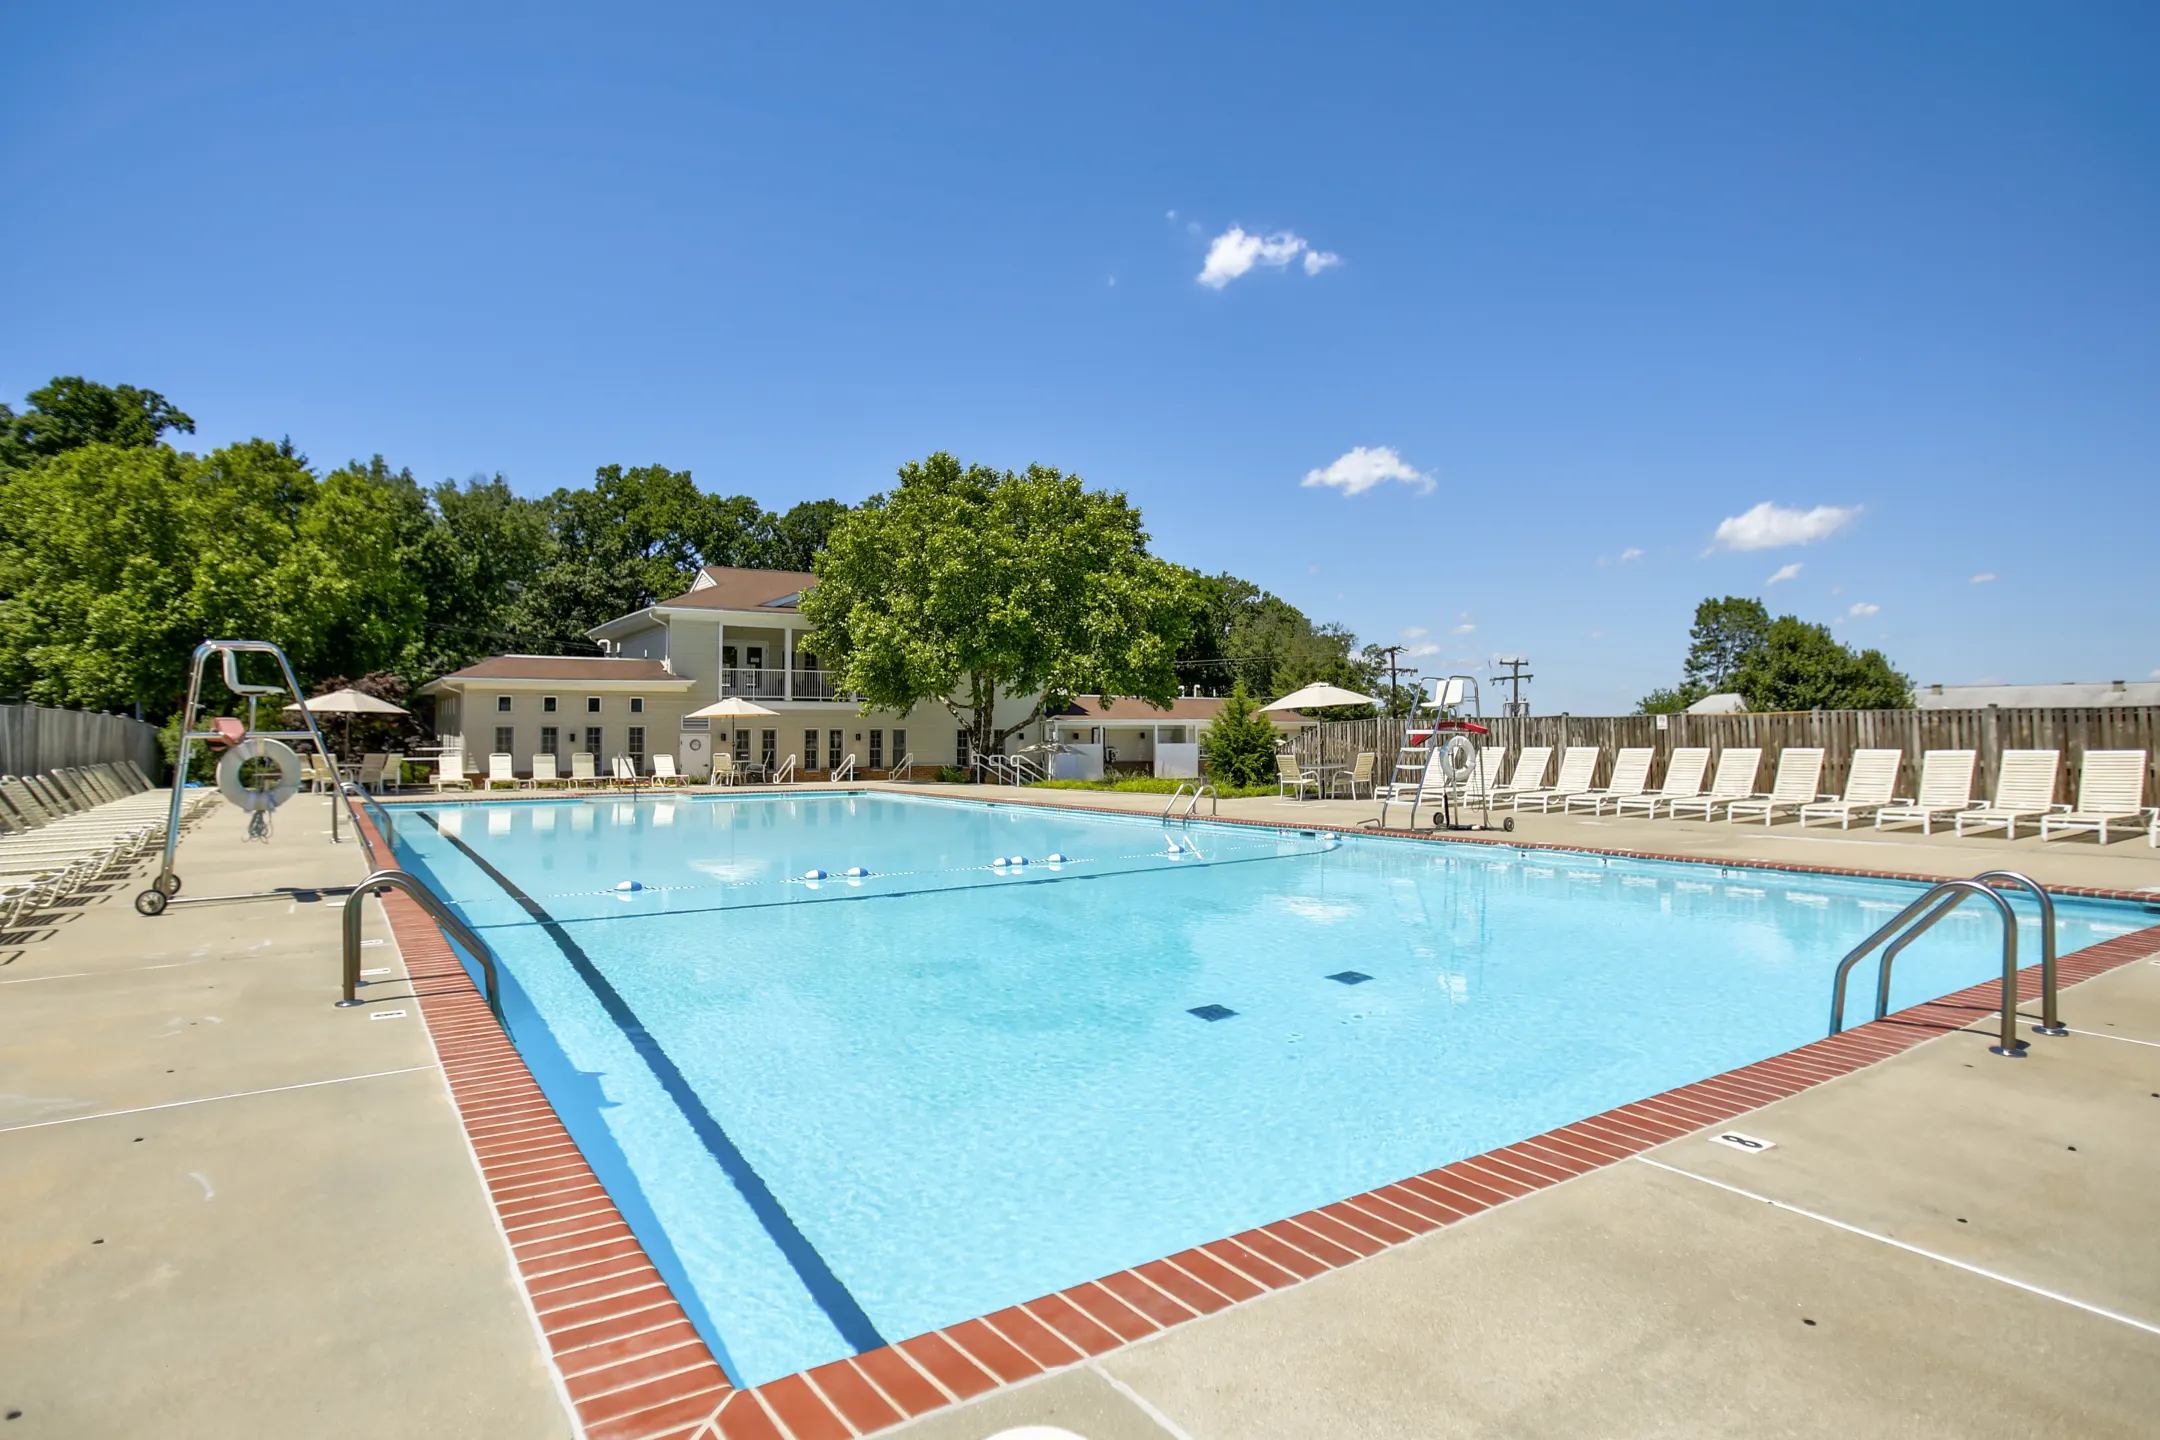 Pool - Dolley Madison Apartments at Tysons - McLean, VA